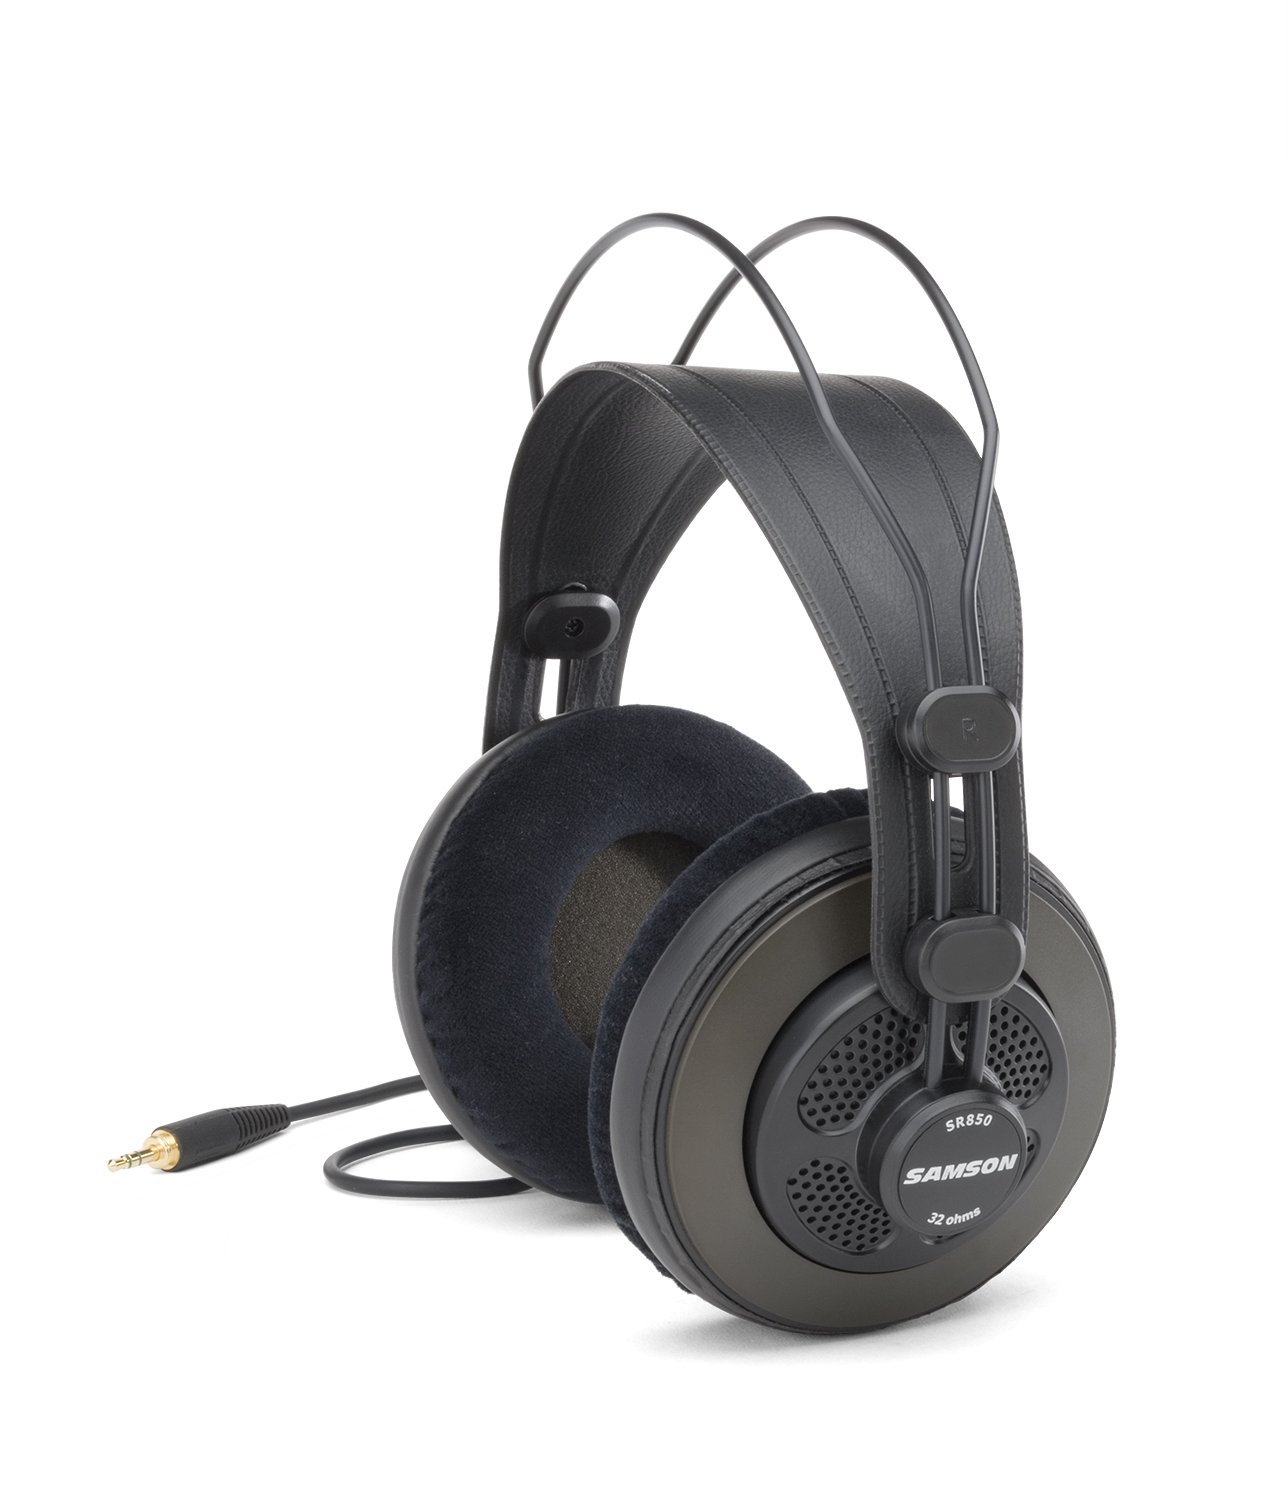 Samson SR850 Studio Wired Over Ear Headphones Without Mic